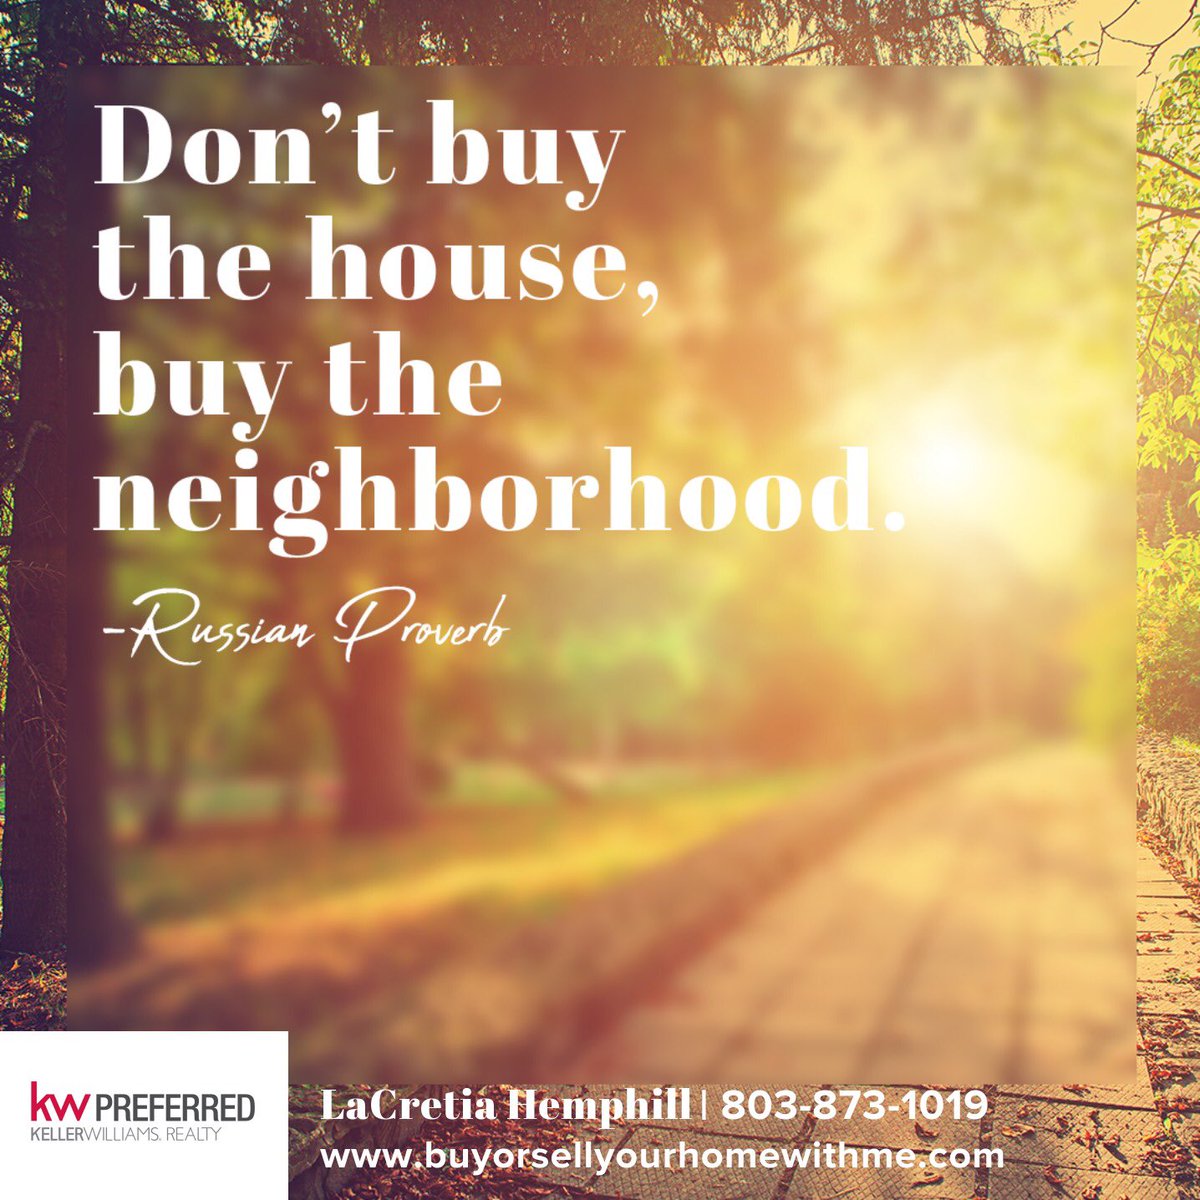 Deciding on the community you want to live in is a big part of buying a home! As a homeowner you’ll be investing in your neighborhood and your city. Let’s find the place you want to put down roots! 
#mytimeisyourtime #home #househunting #realestate #putdownroots #homeowner